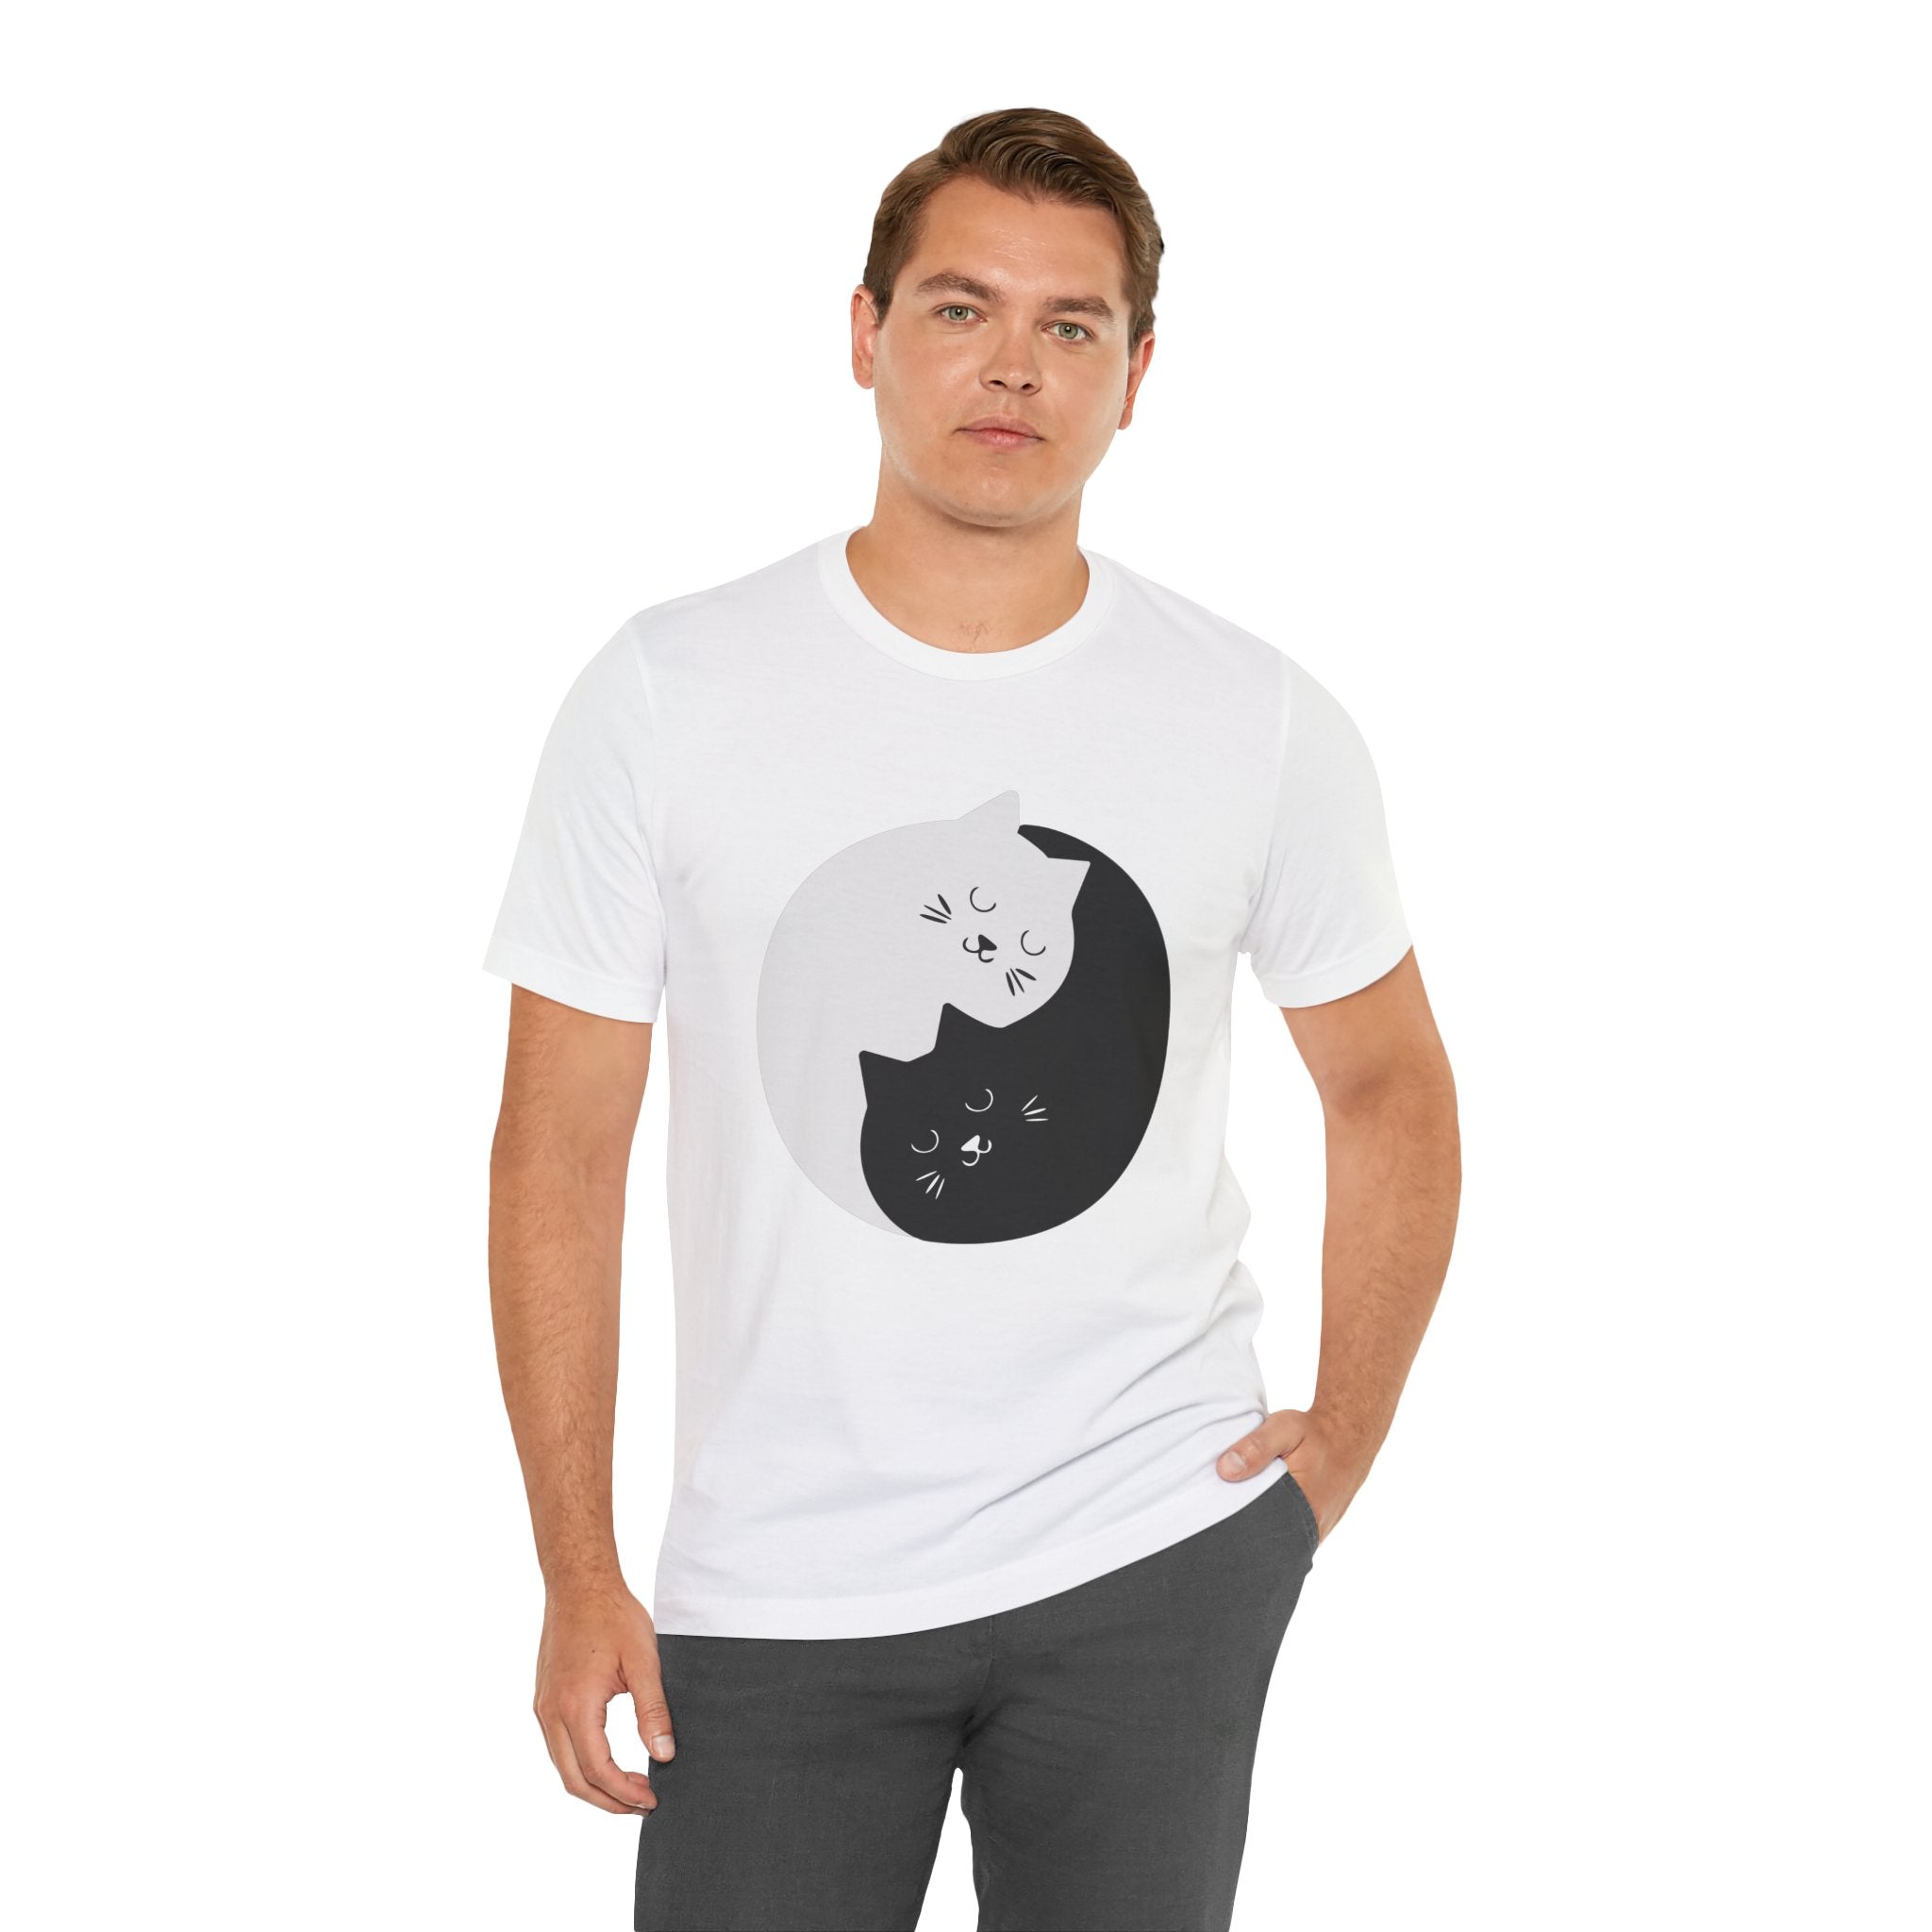 Man in a white YING- ANG KITTIES T-Shirt with a black cat graphic, standing against a plain background.